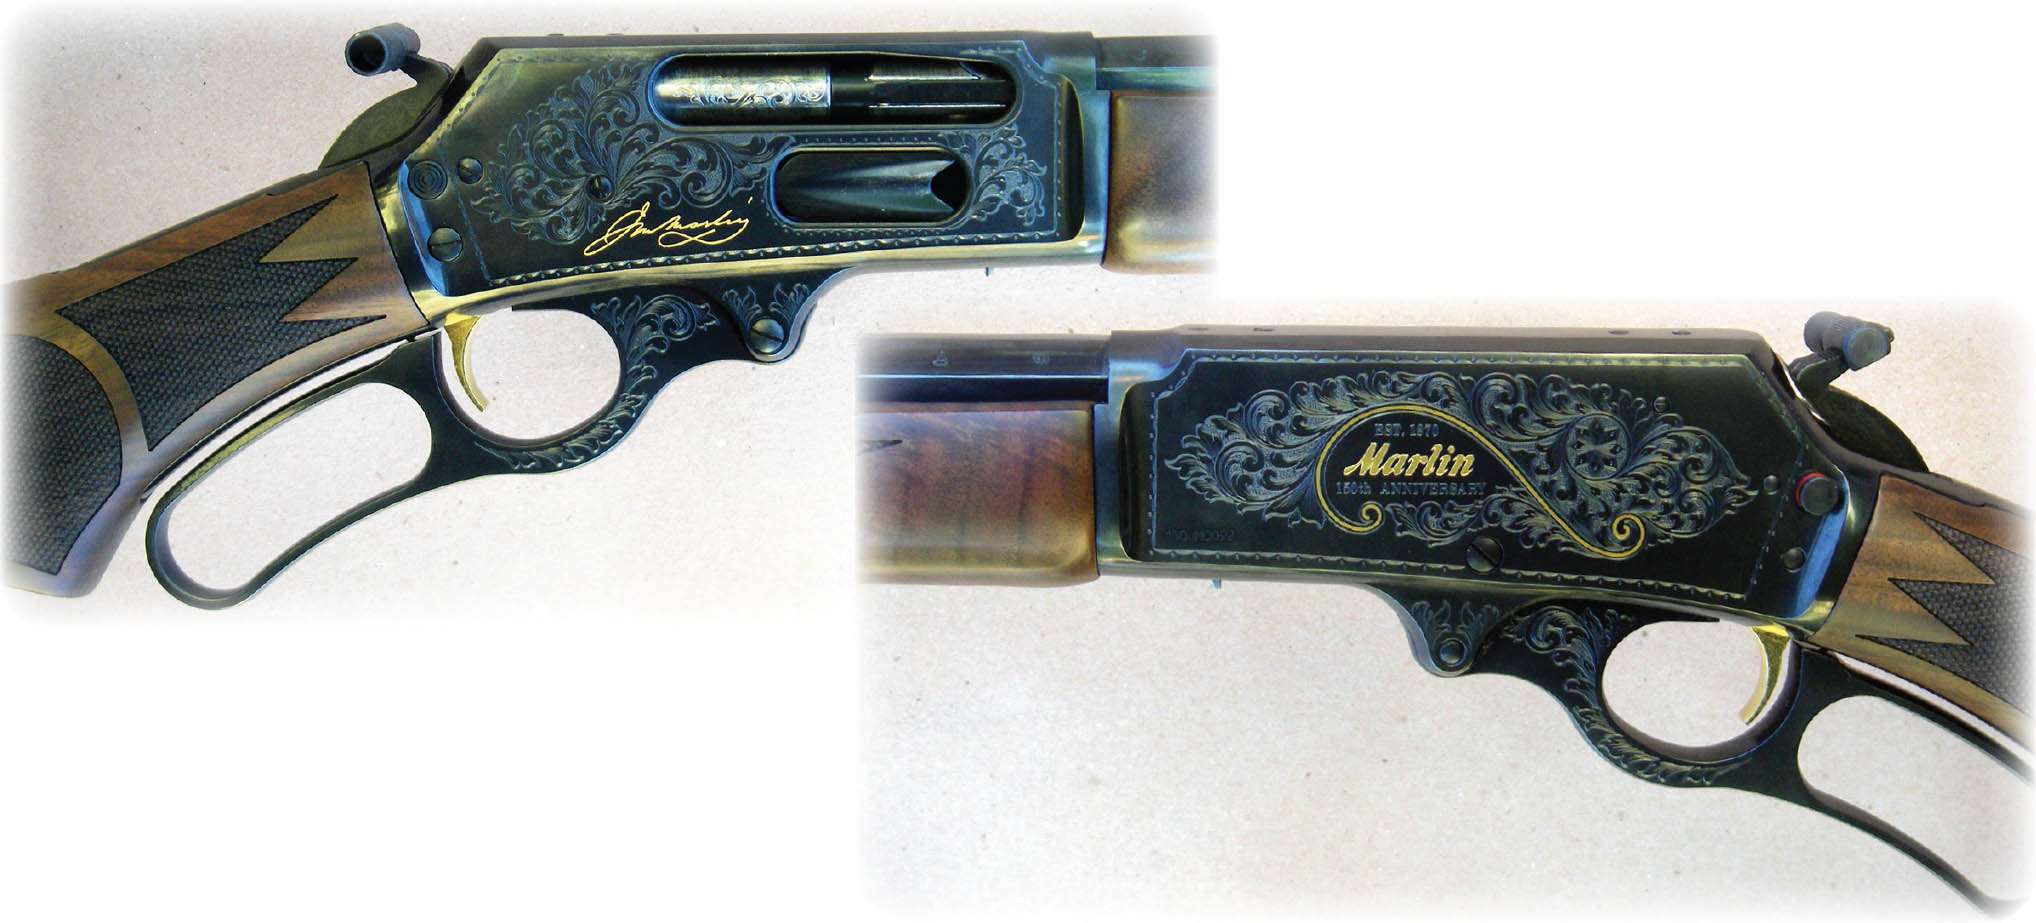 The Model 444 .444 Marlin rifle receiver is fully engraved with gold accents. The lever and bolt are also engraved.